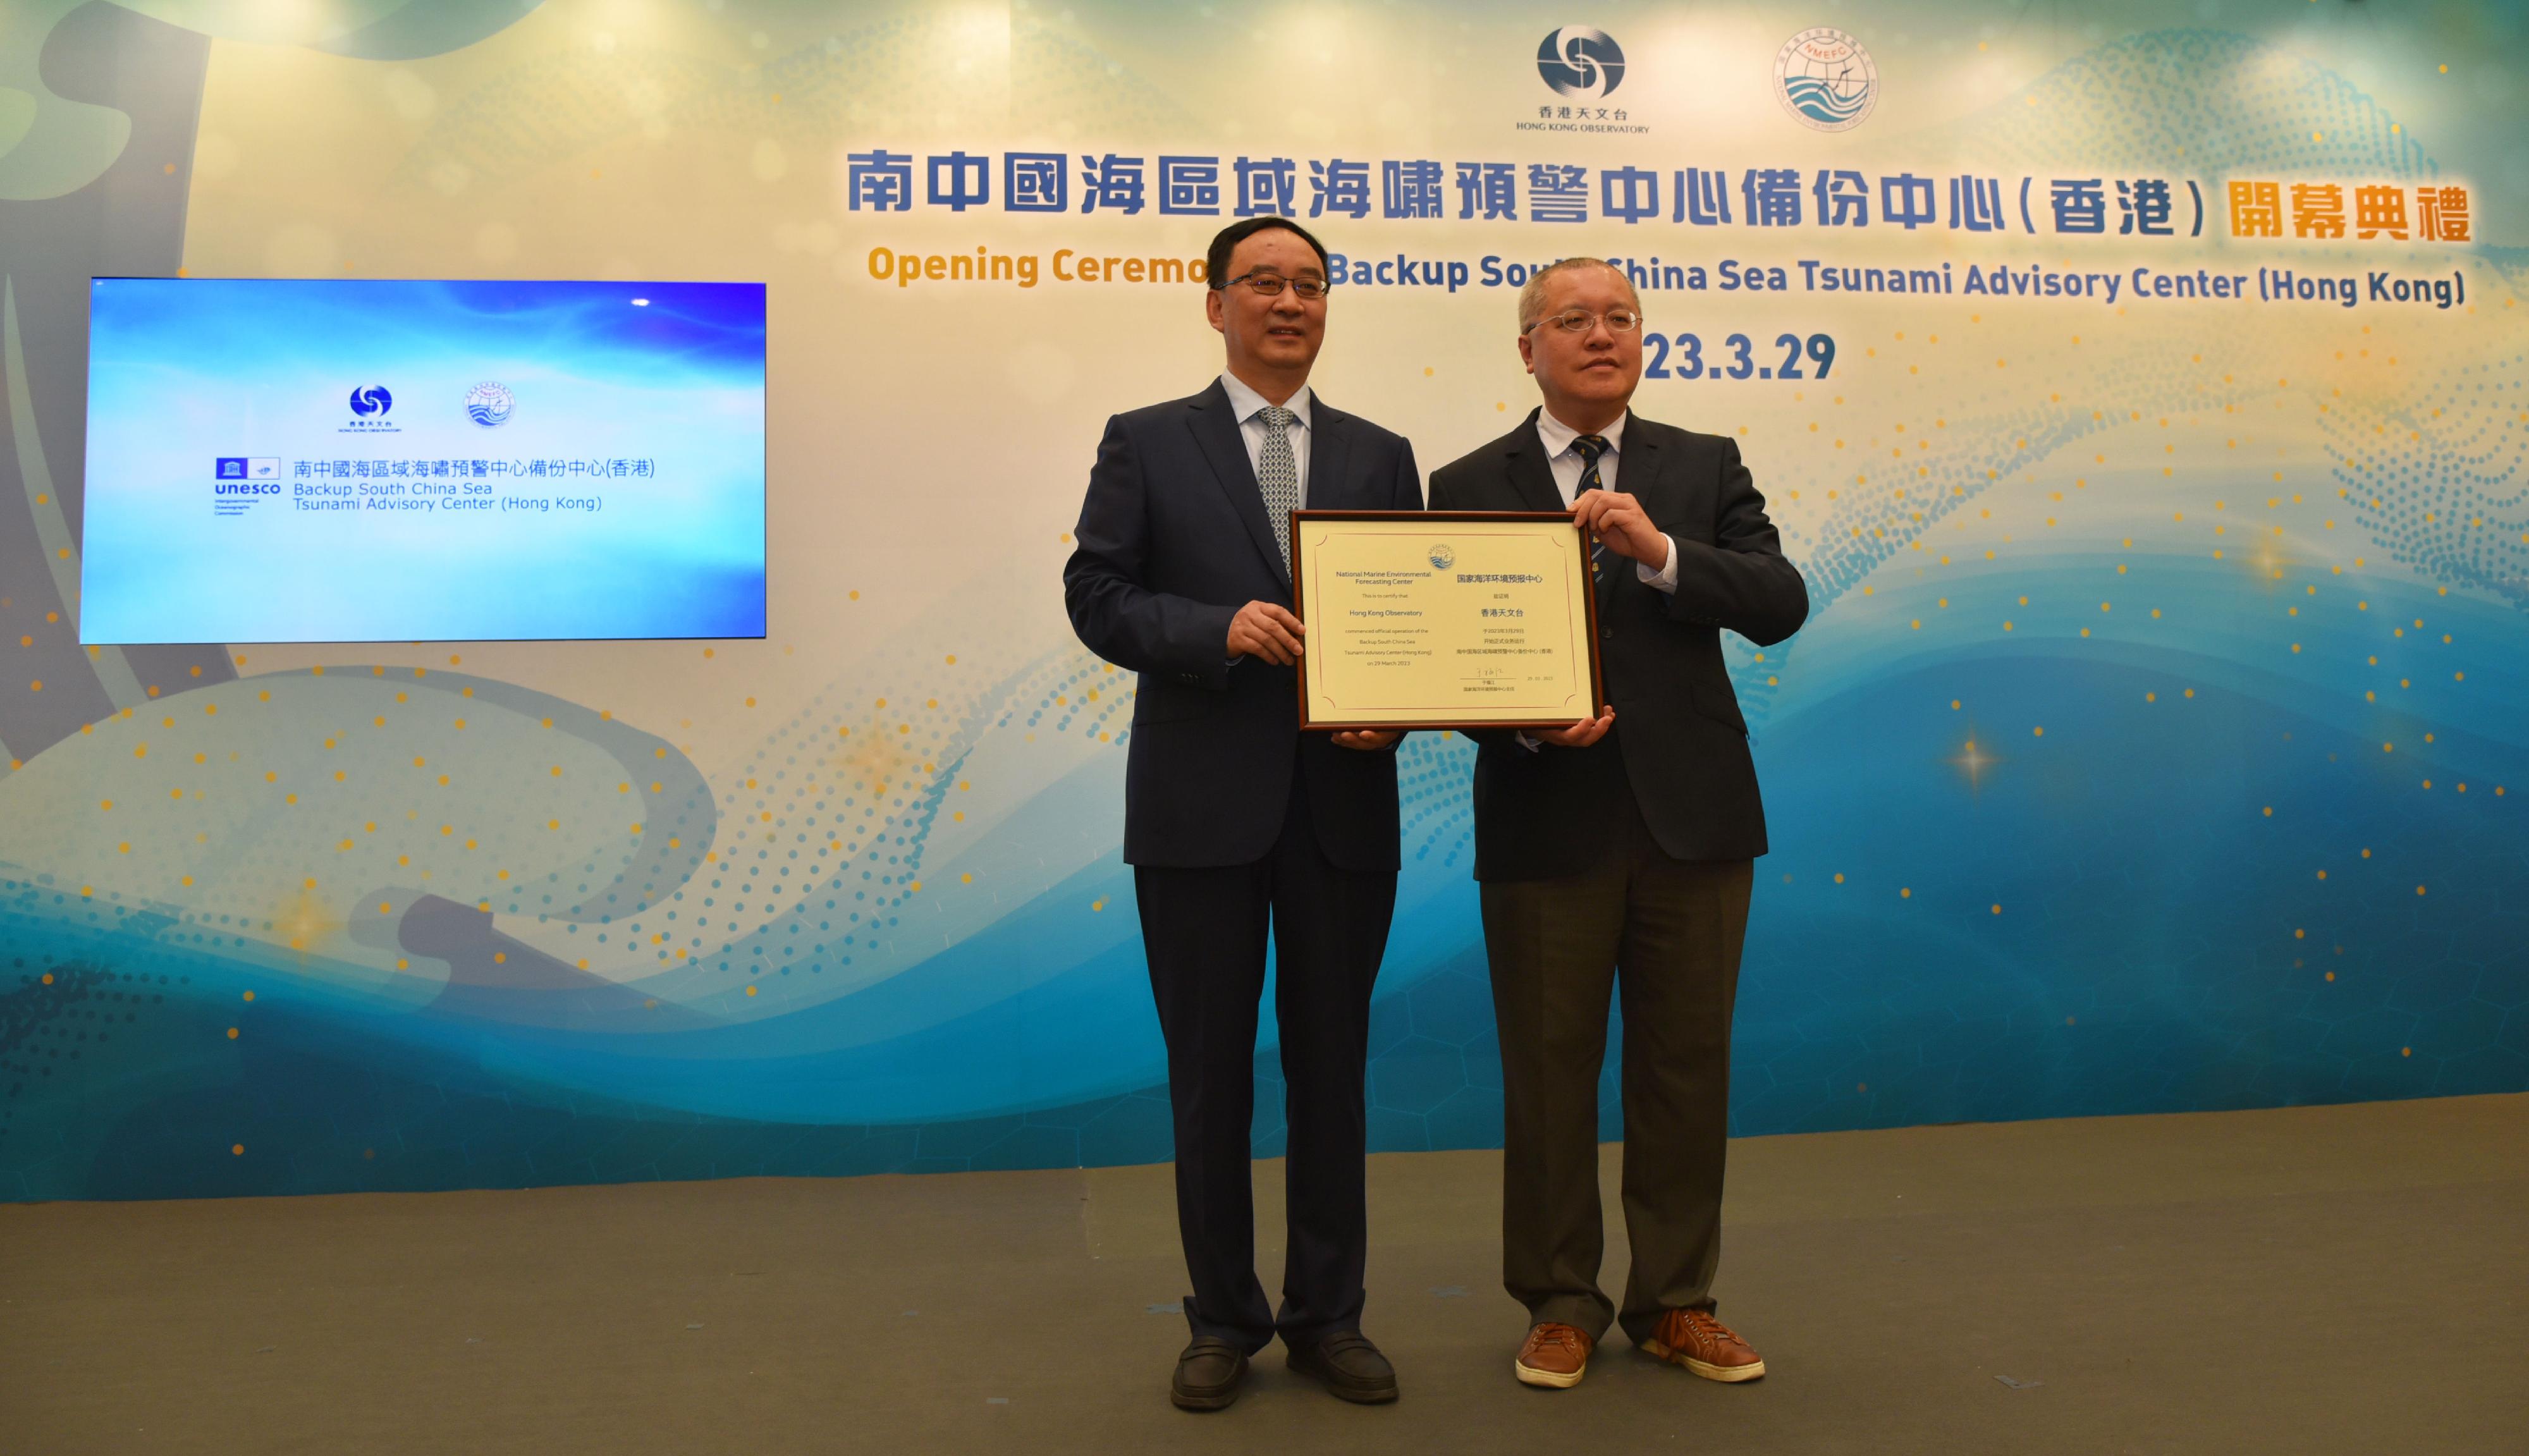 The Backup South China Sea Tsunami Advisory Center (Hong Kong) (BSCSTAC) officially commenced operation today (March 29). Photo shows the Director-General of the National Marine Environmental Forecasting Center, Professor Yu Fujiang (left), presenting a certificate of the BSCSTAC to the Director of the Hong Kong Observatory, Mr Chan Pak-wai (right).